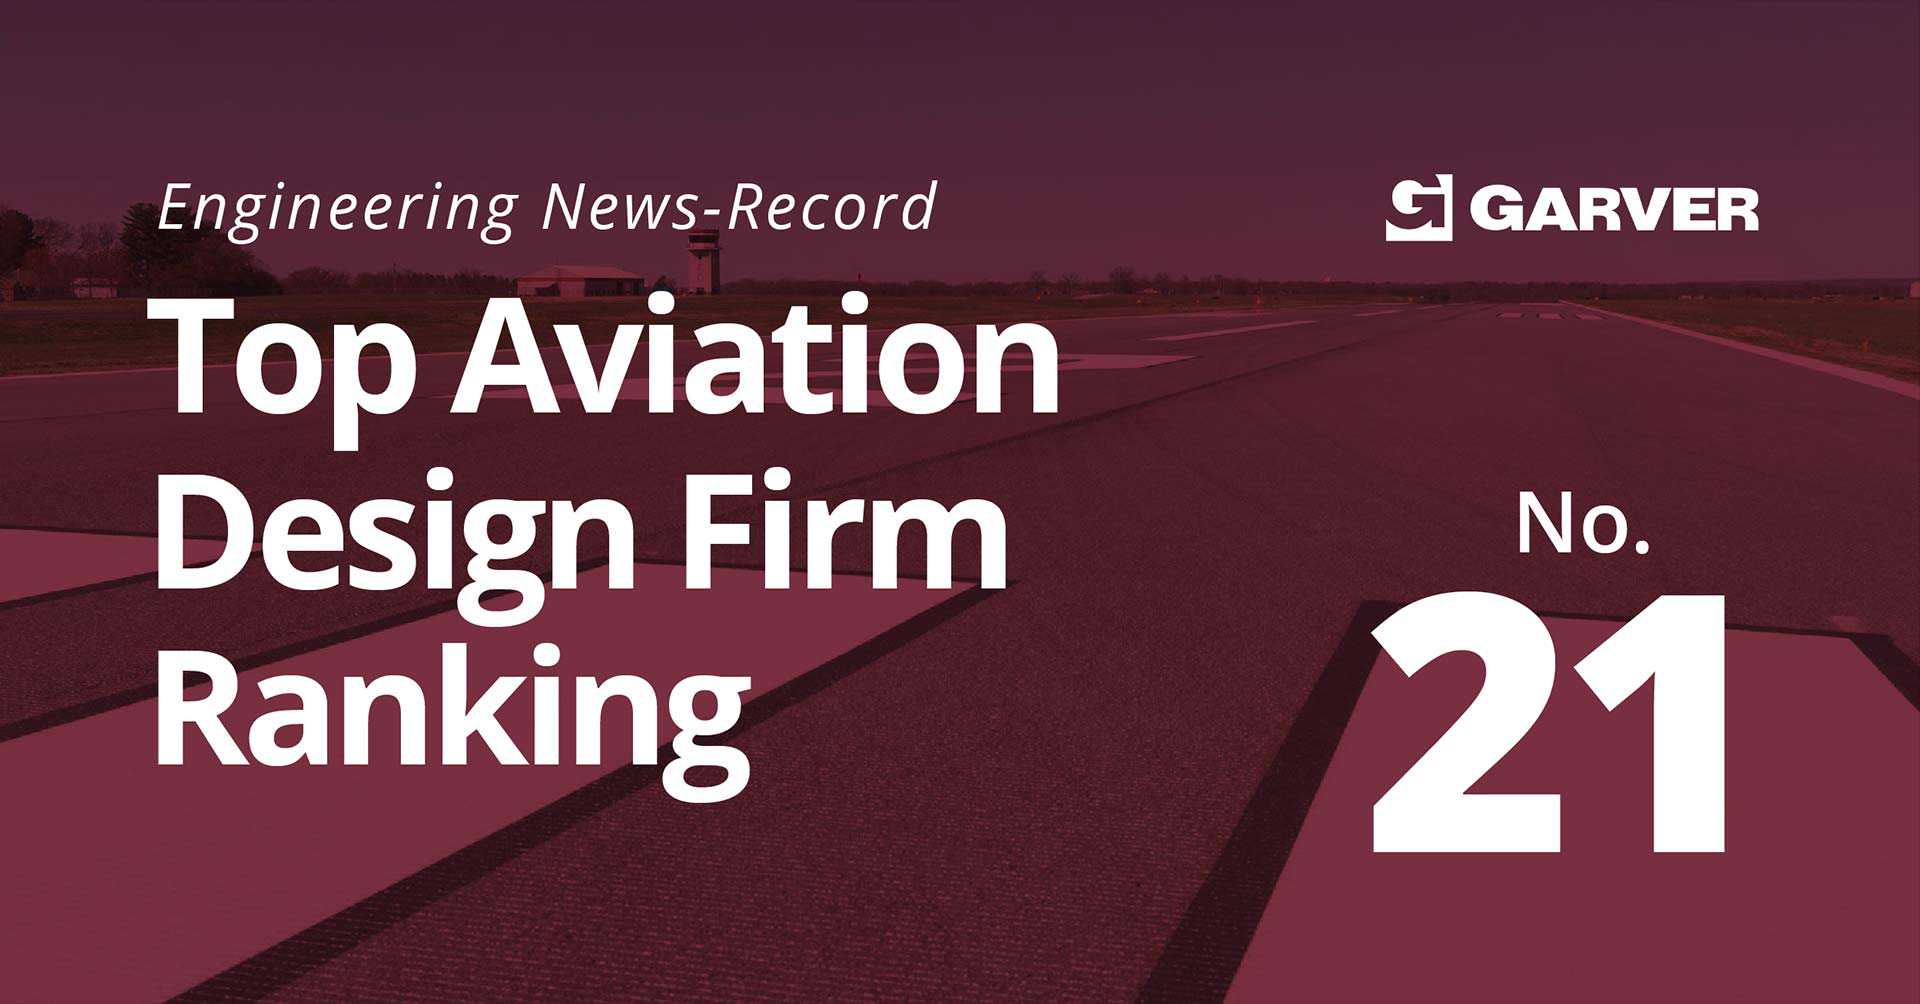 Garver recognized by ENR as leading aviation design firm